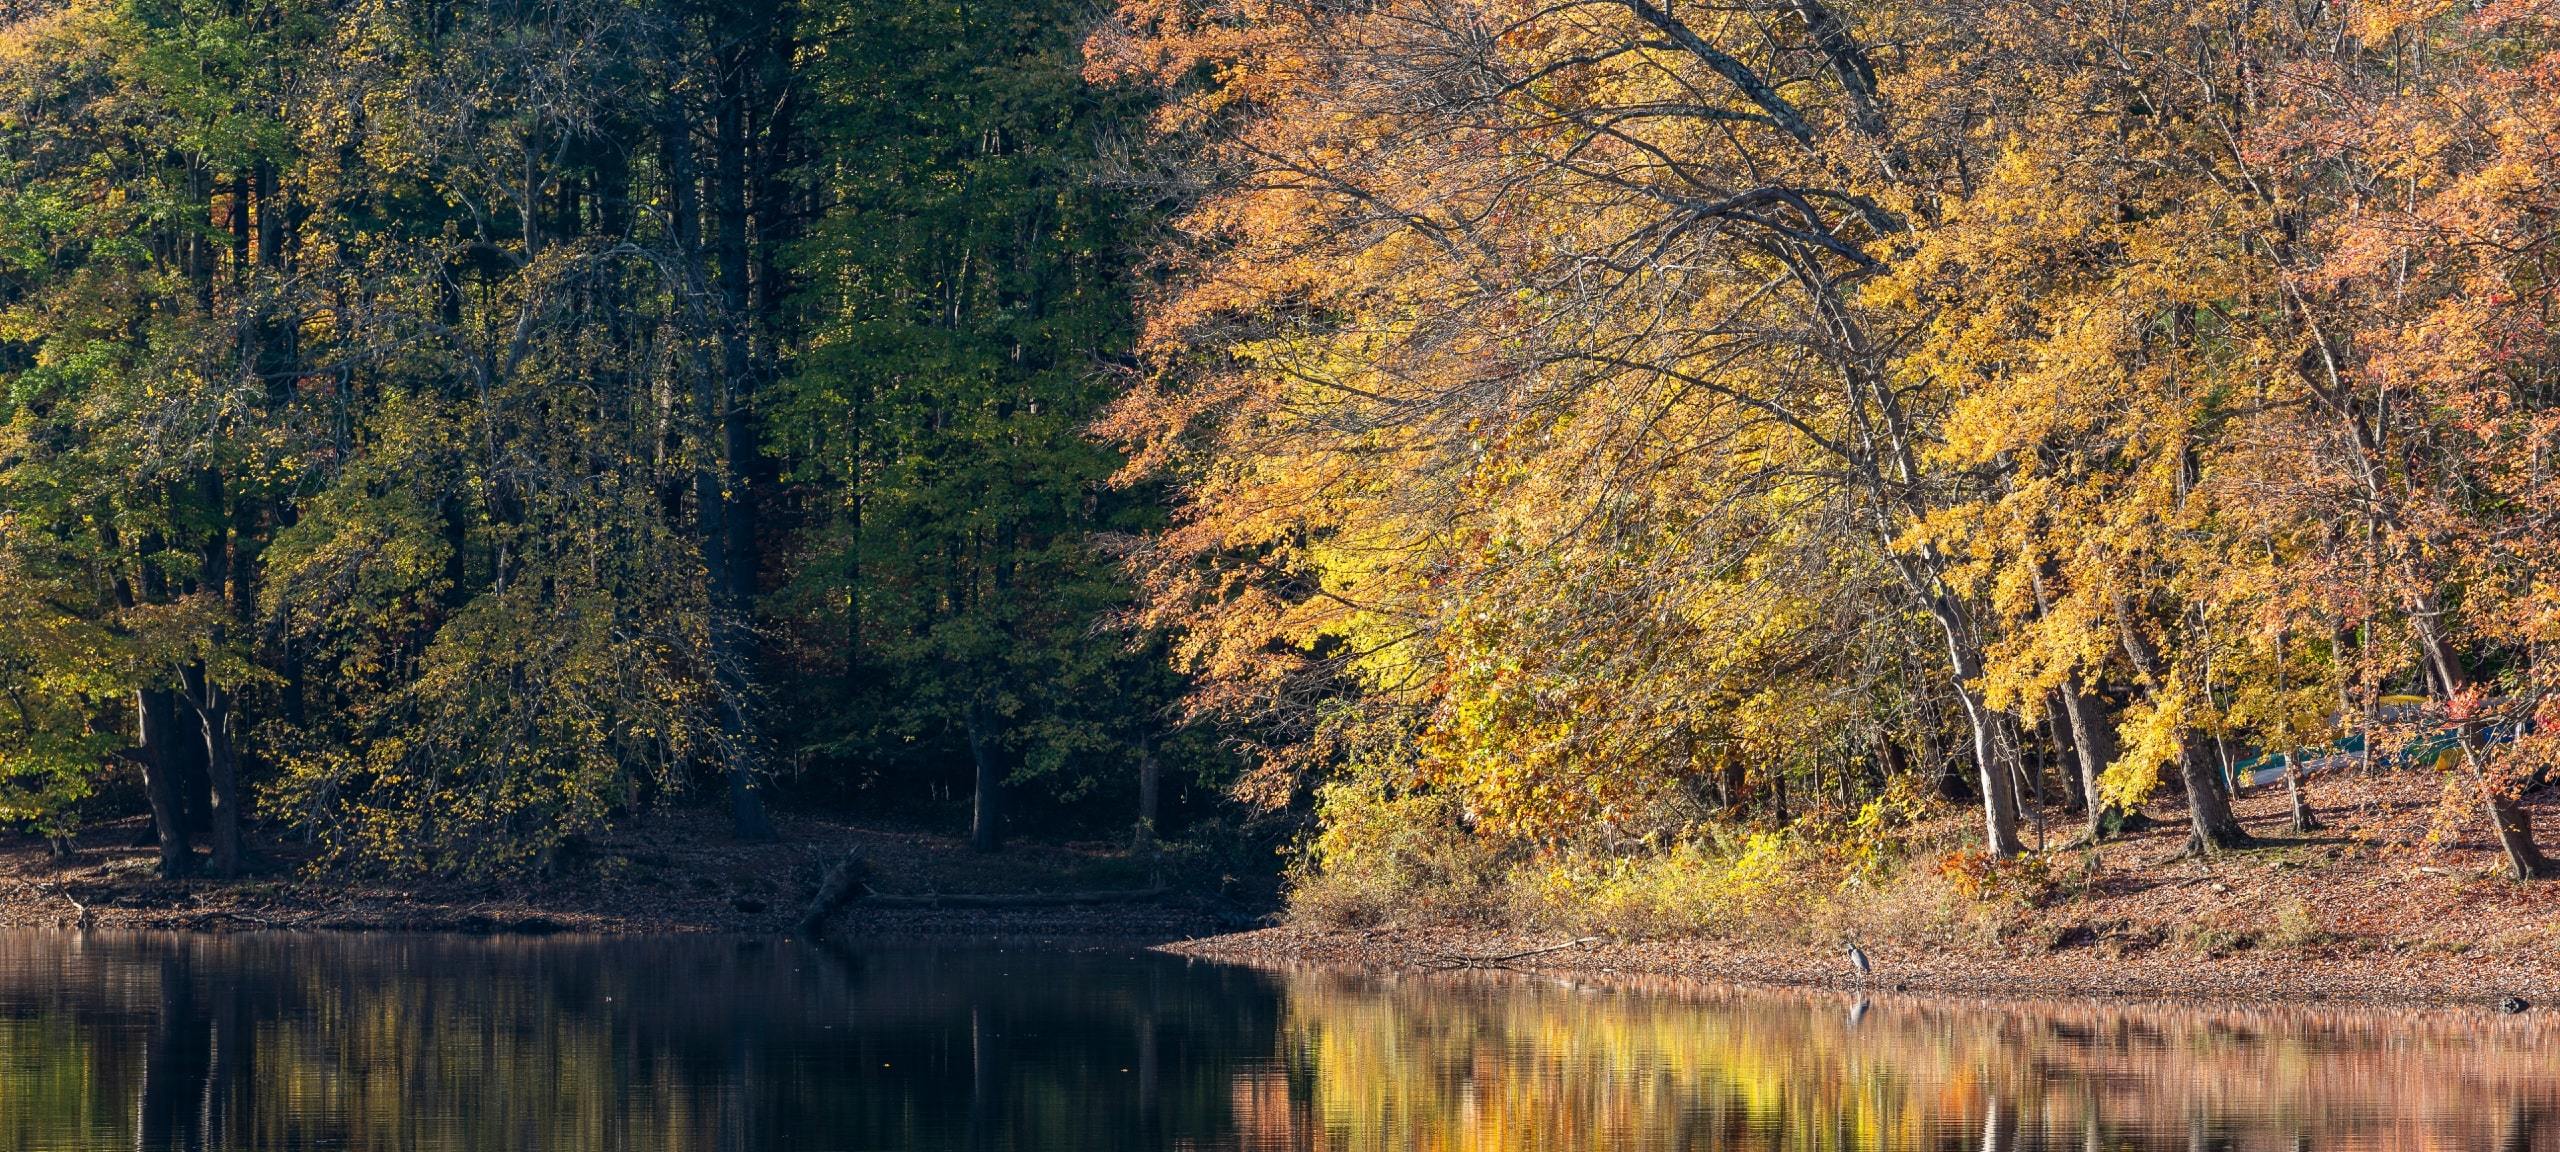 Autumn trees at Patuxent River near Highland, Maryland